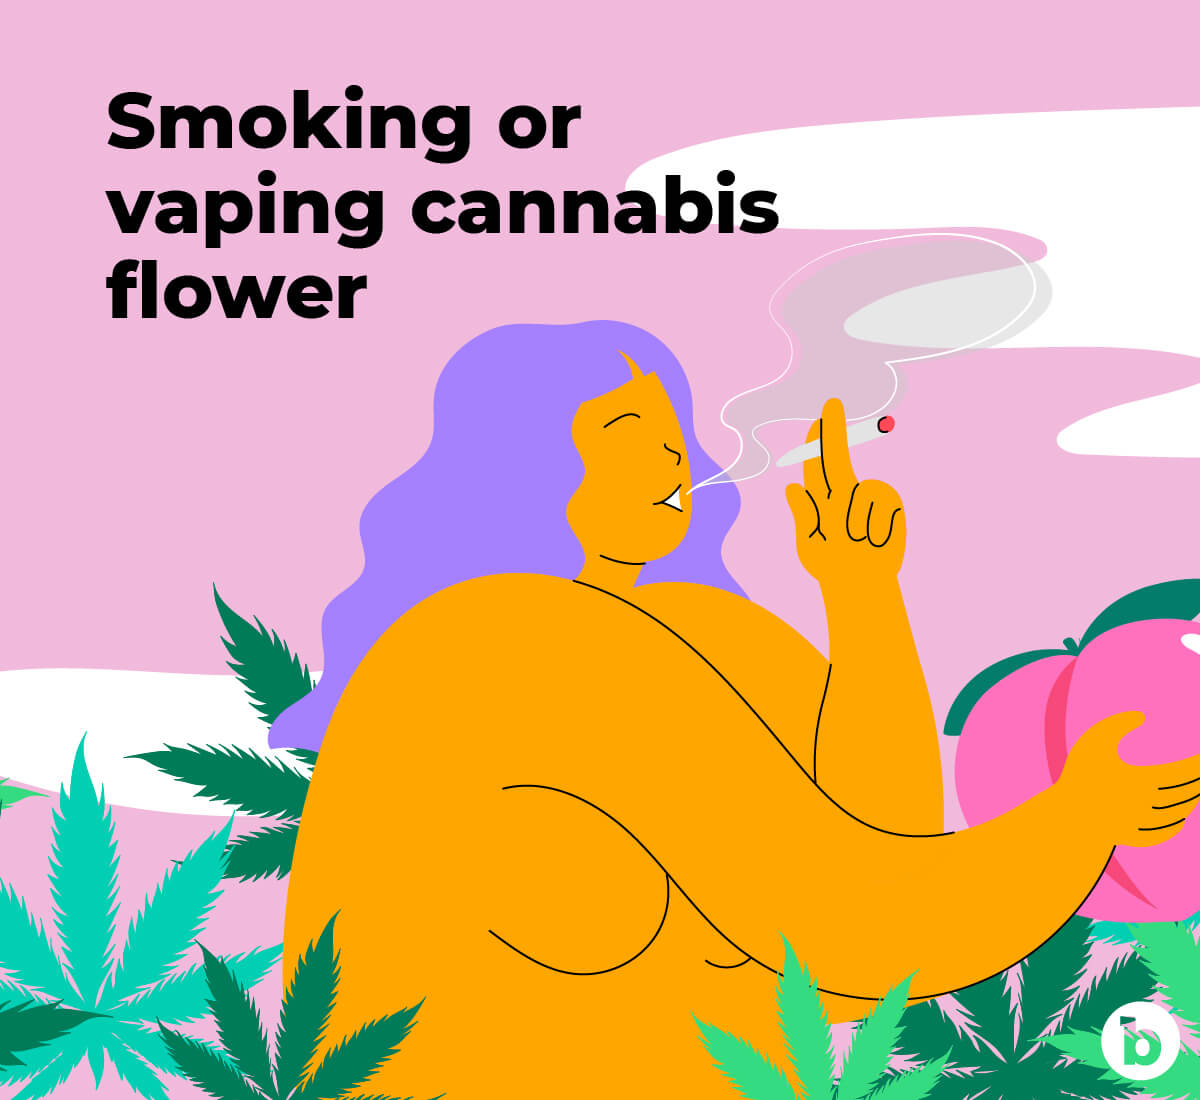 Smoking or vaping cannabis flower can help you relax prior to anal play